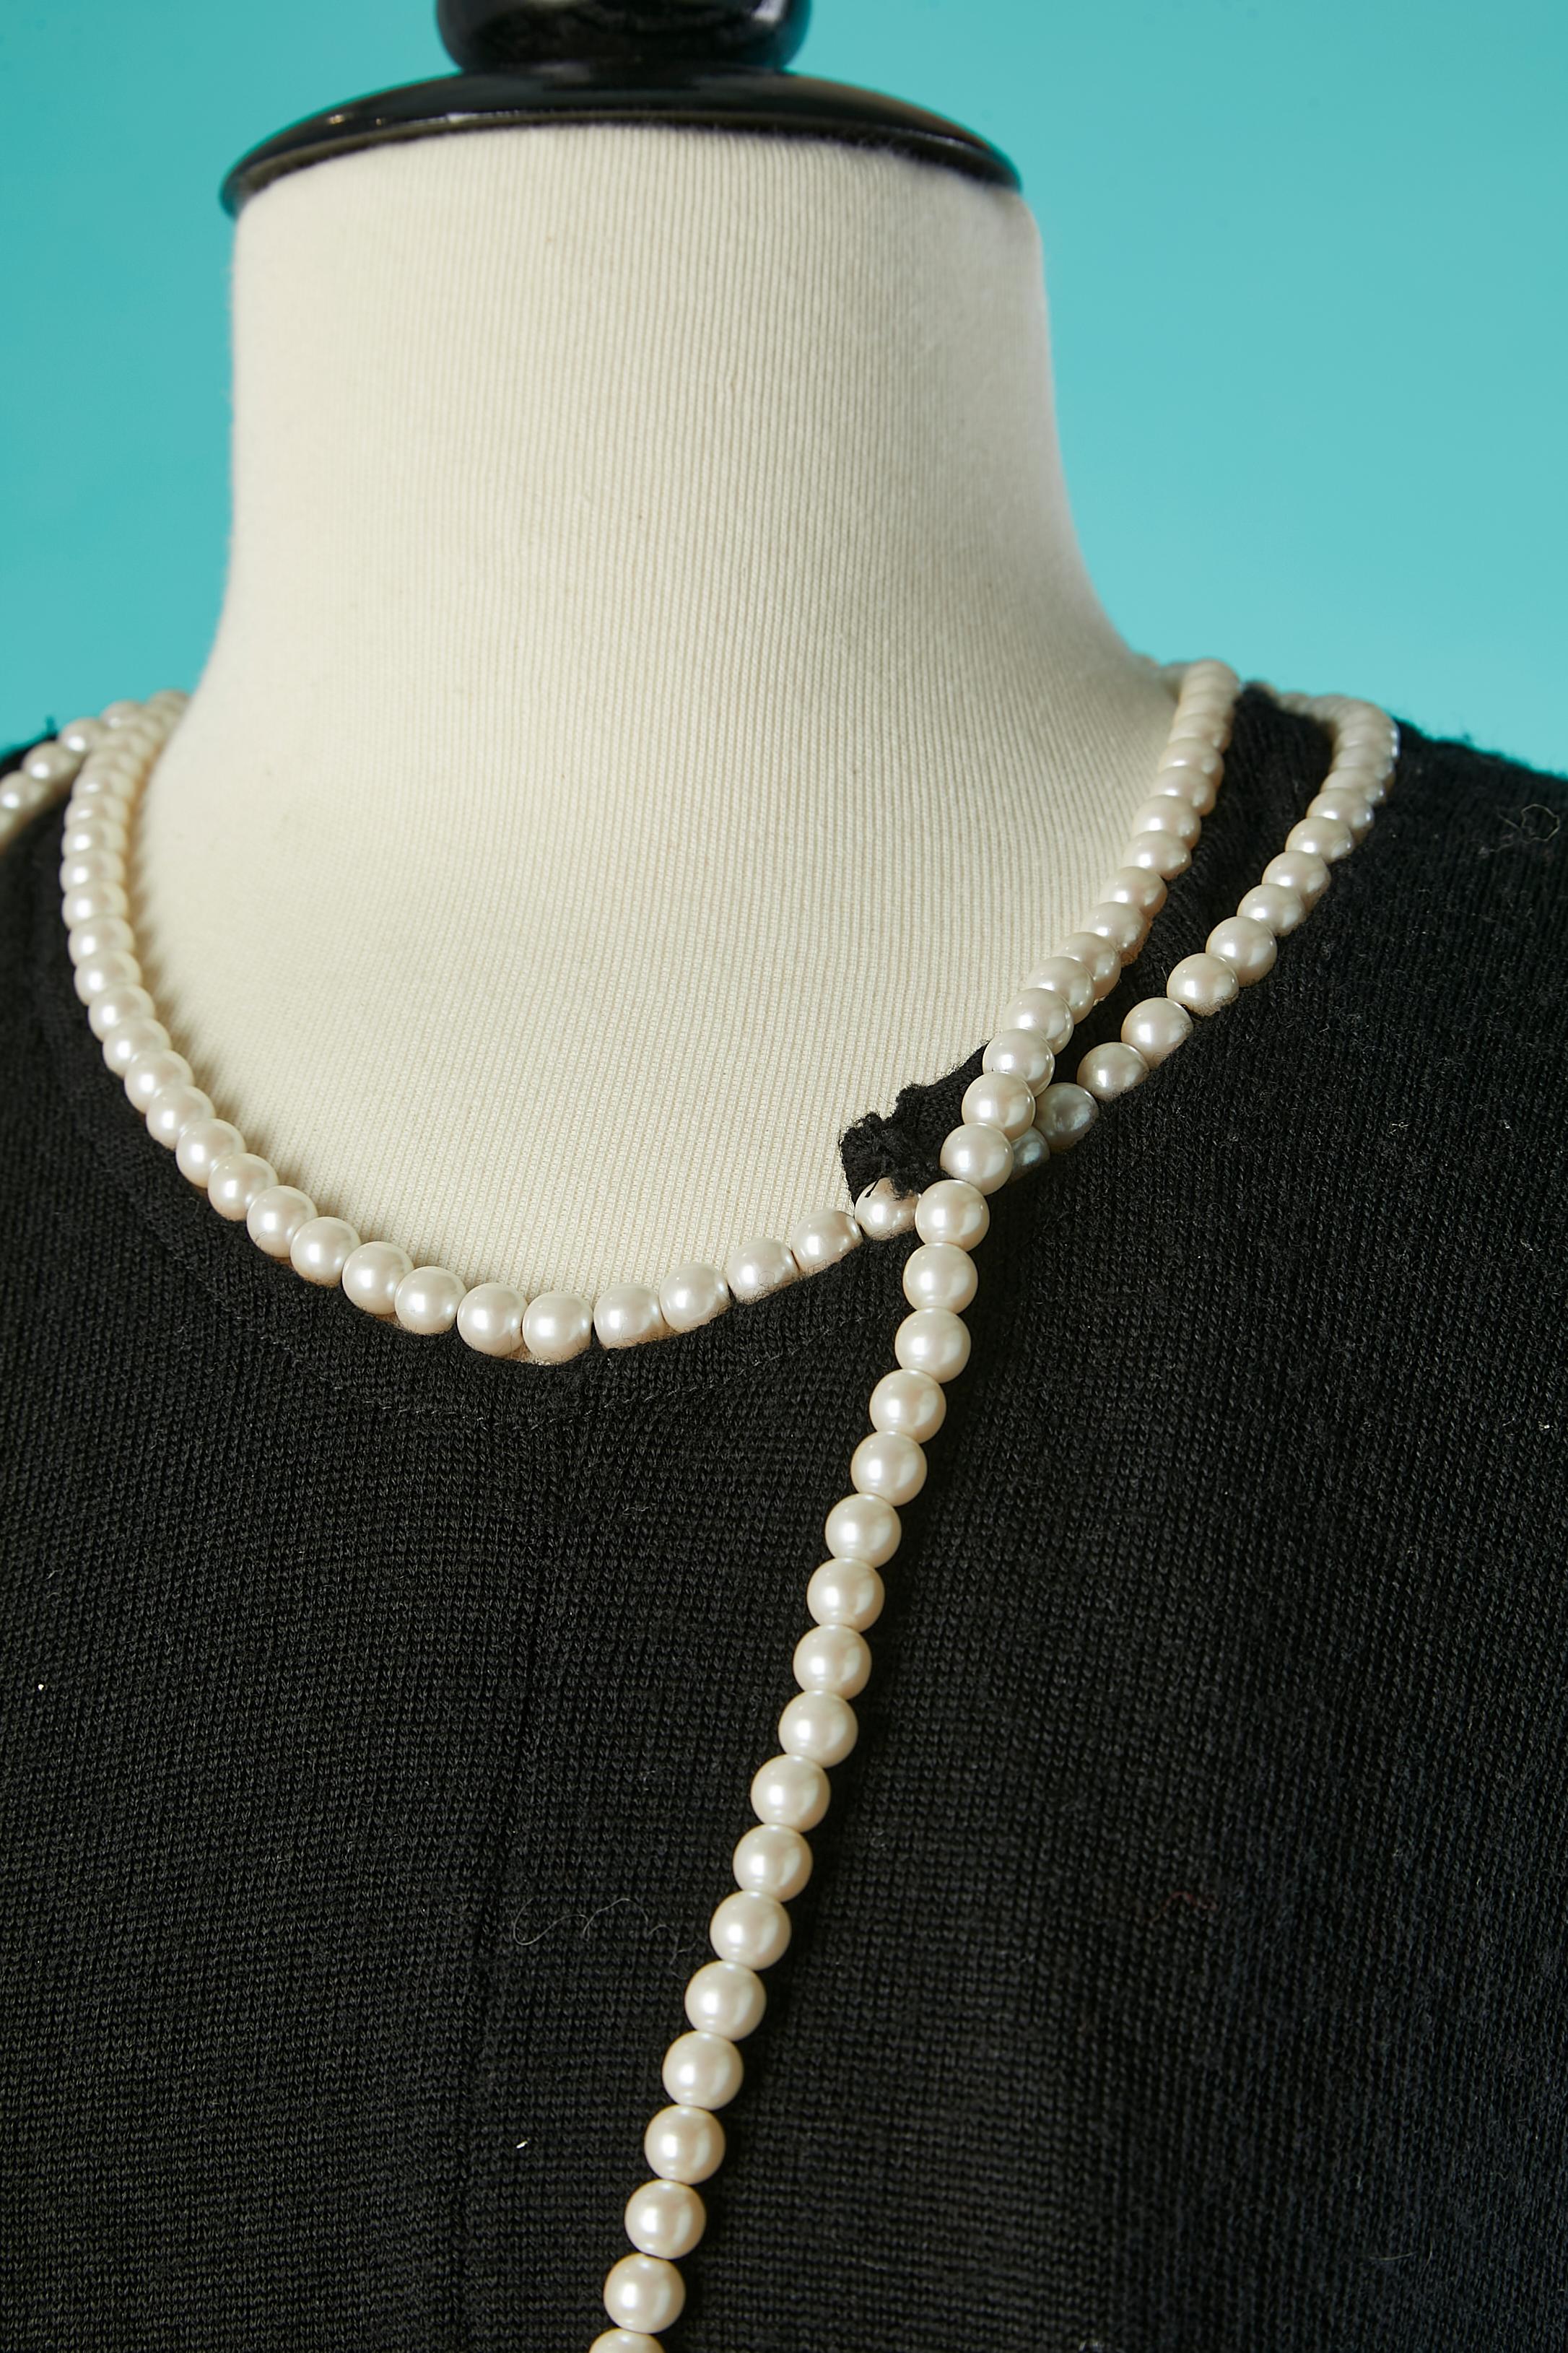 Black wool wrap sweater with pearls neckless.
Clasp on the neckless in the middle front 
SIZE M